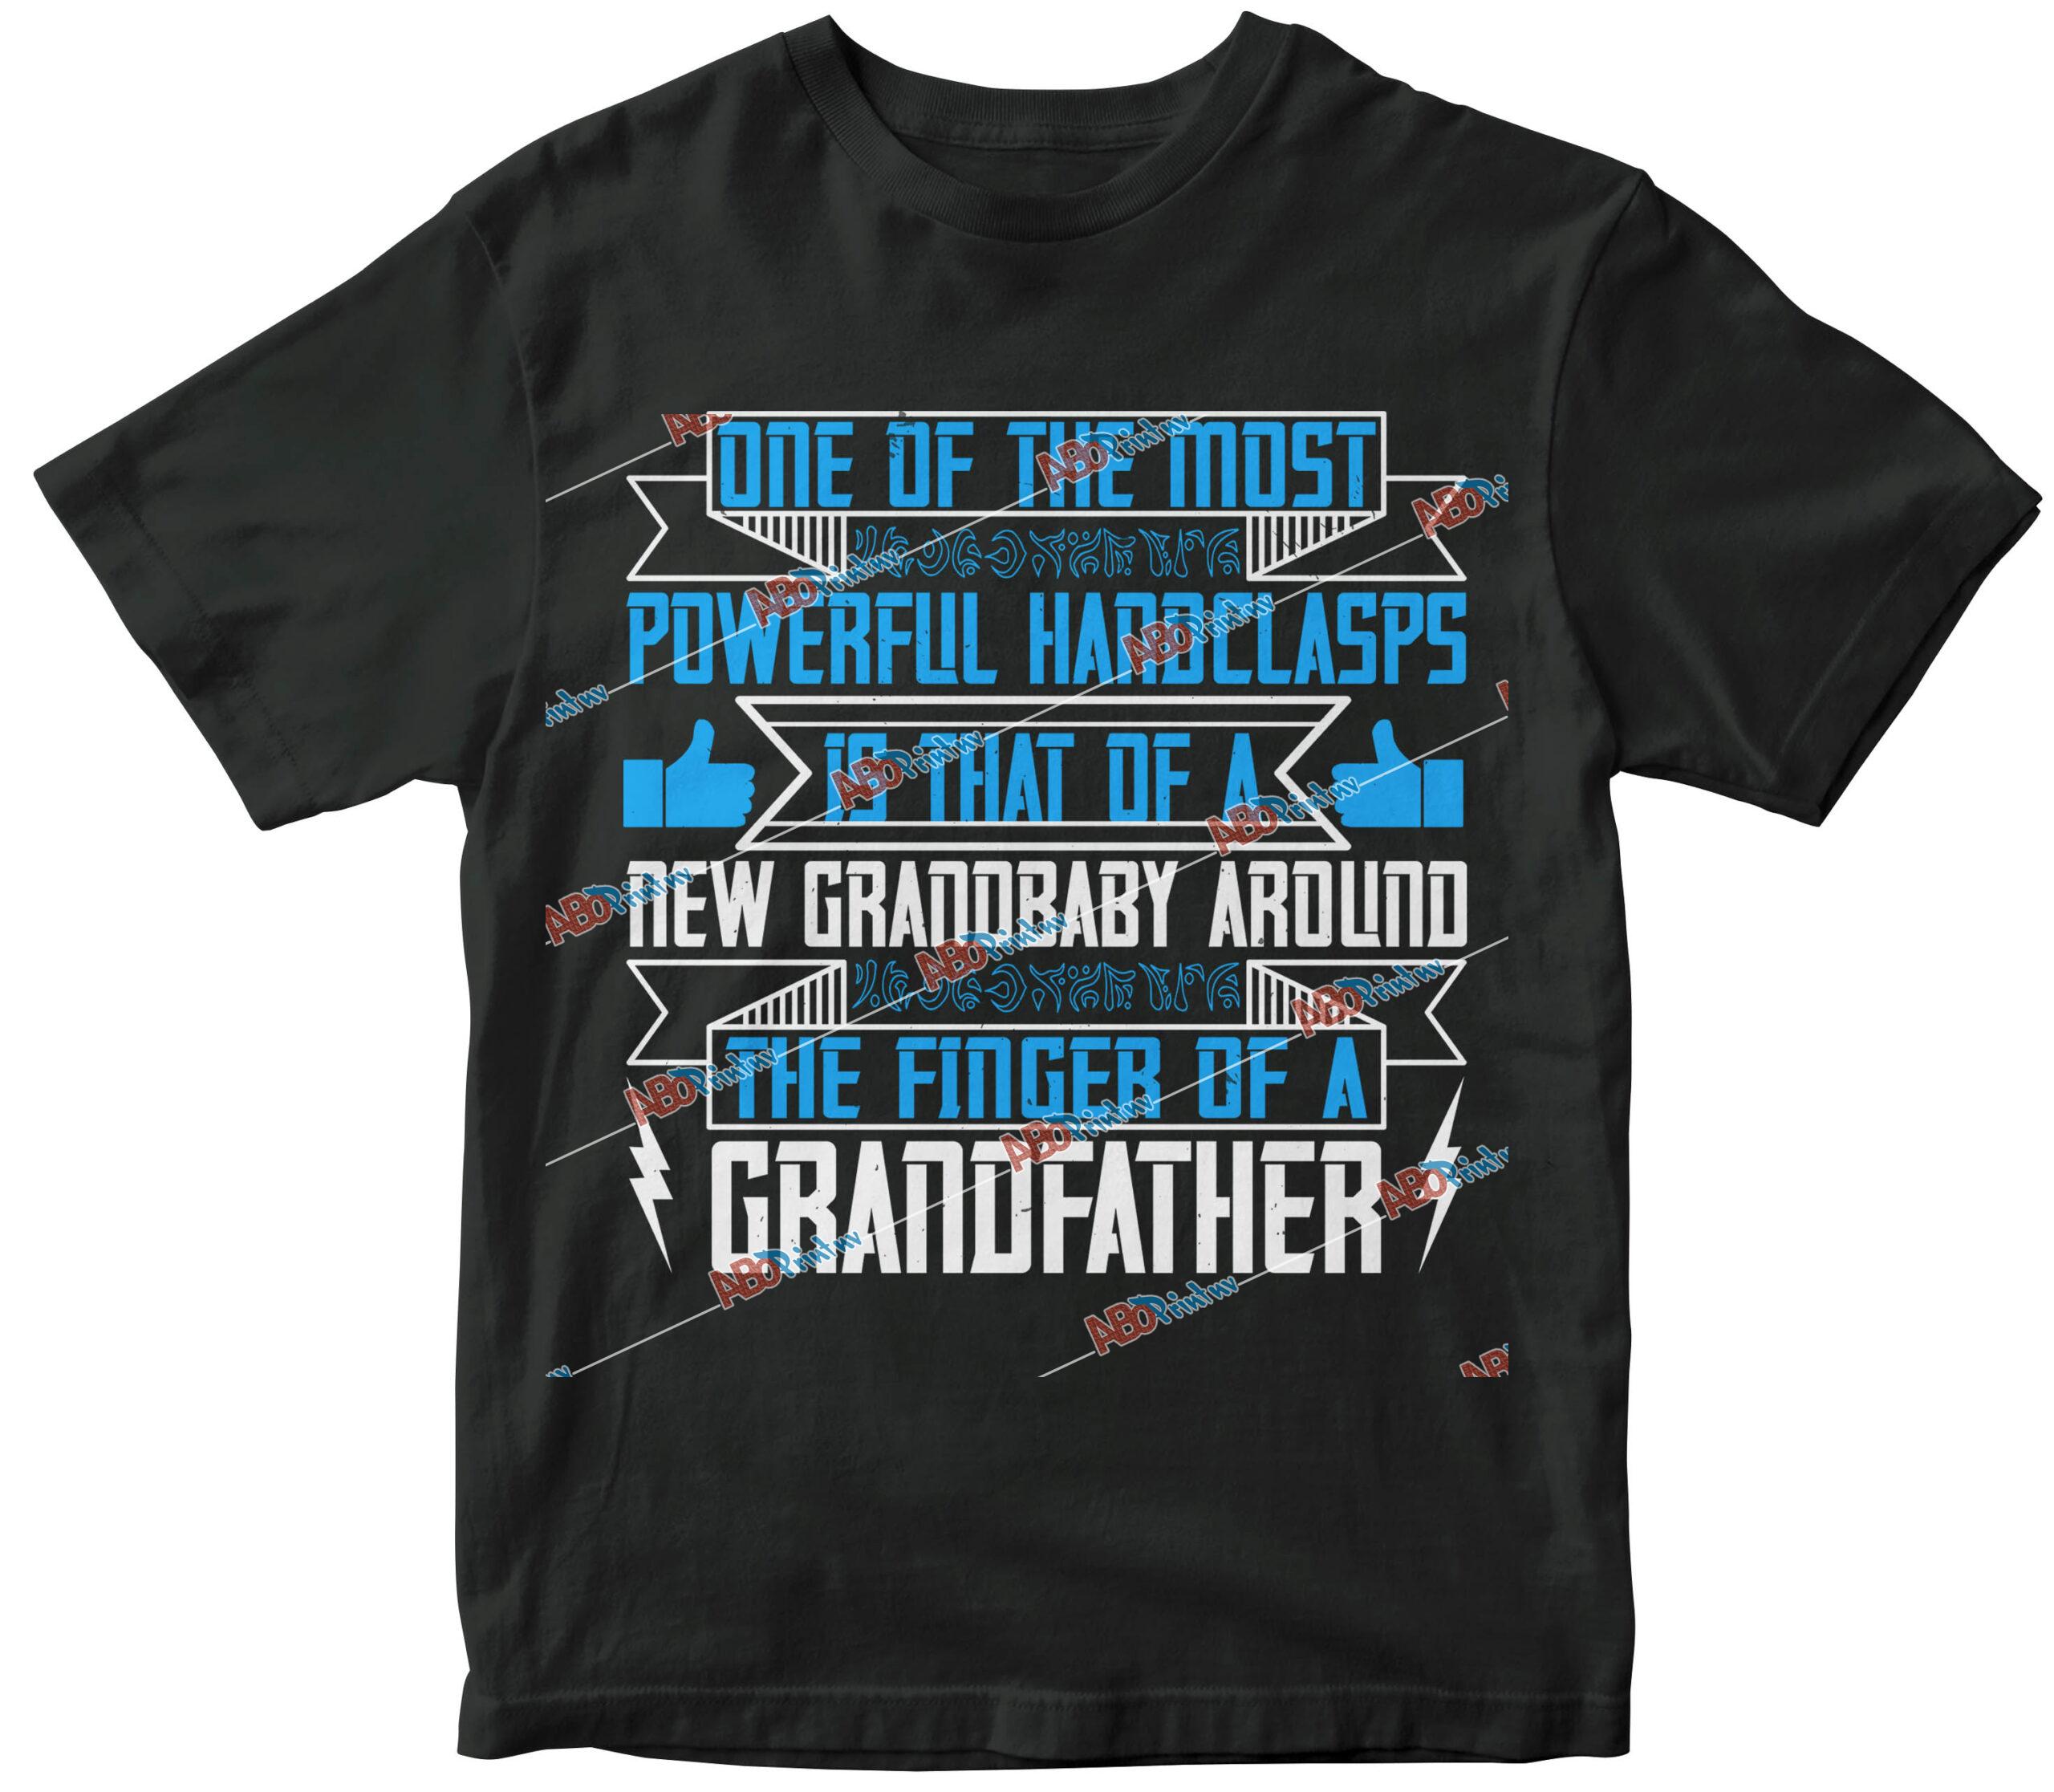 One of the most powerful handclasps is that of a new grandbaby-03.jpg